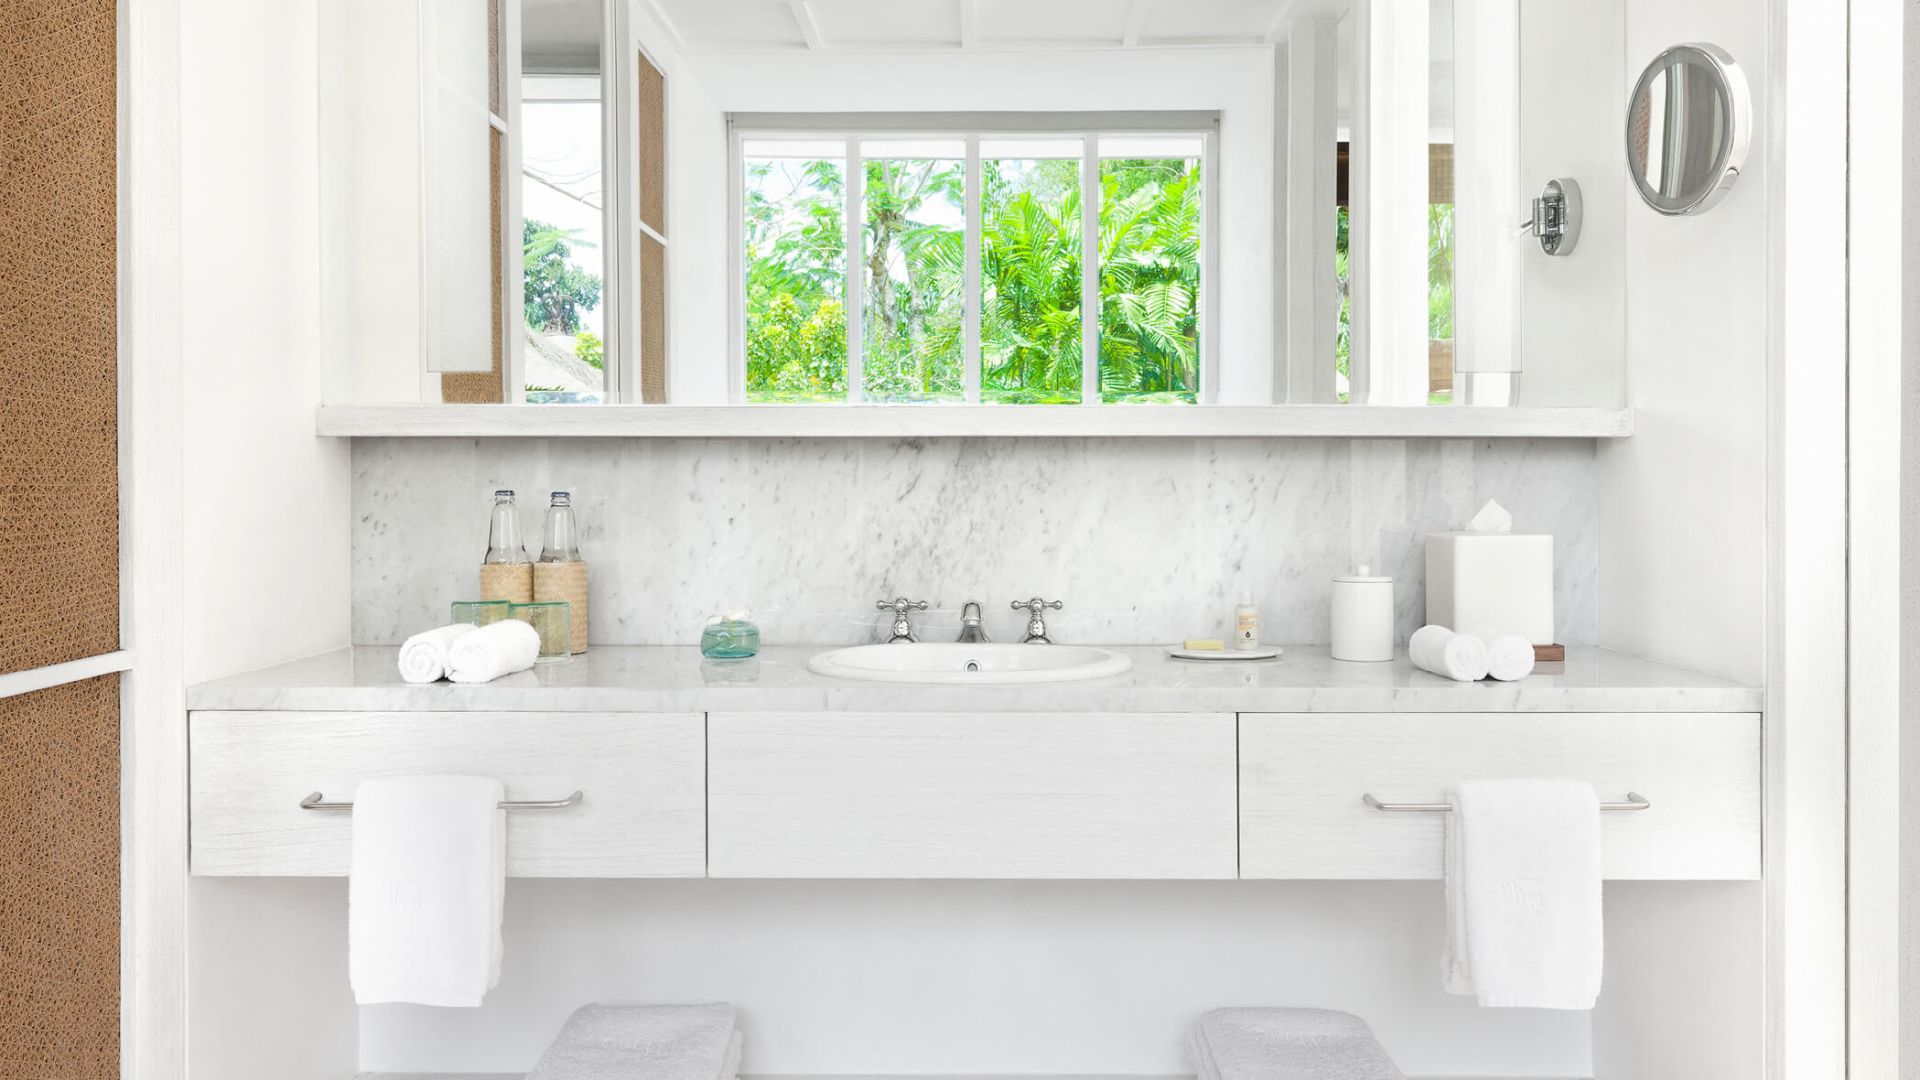 A Bathroom With White Cabinets - Image